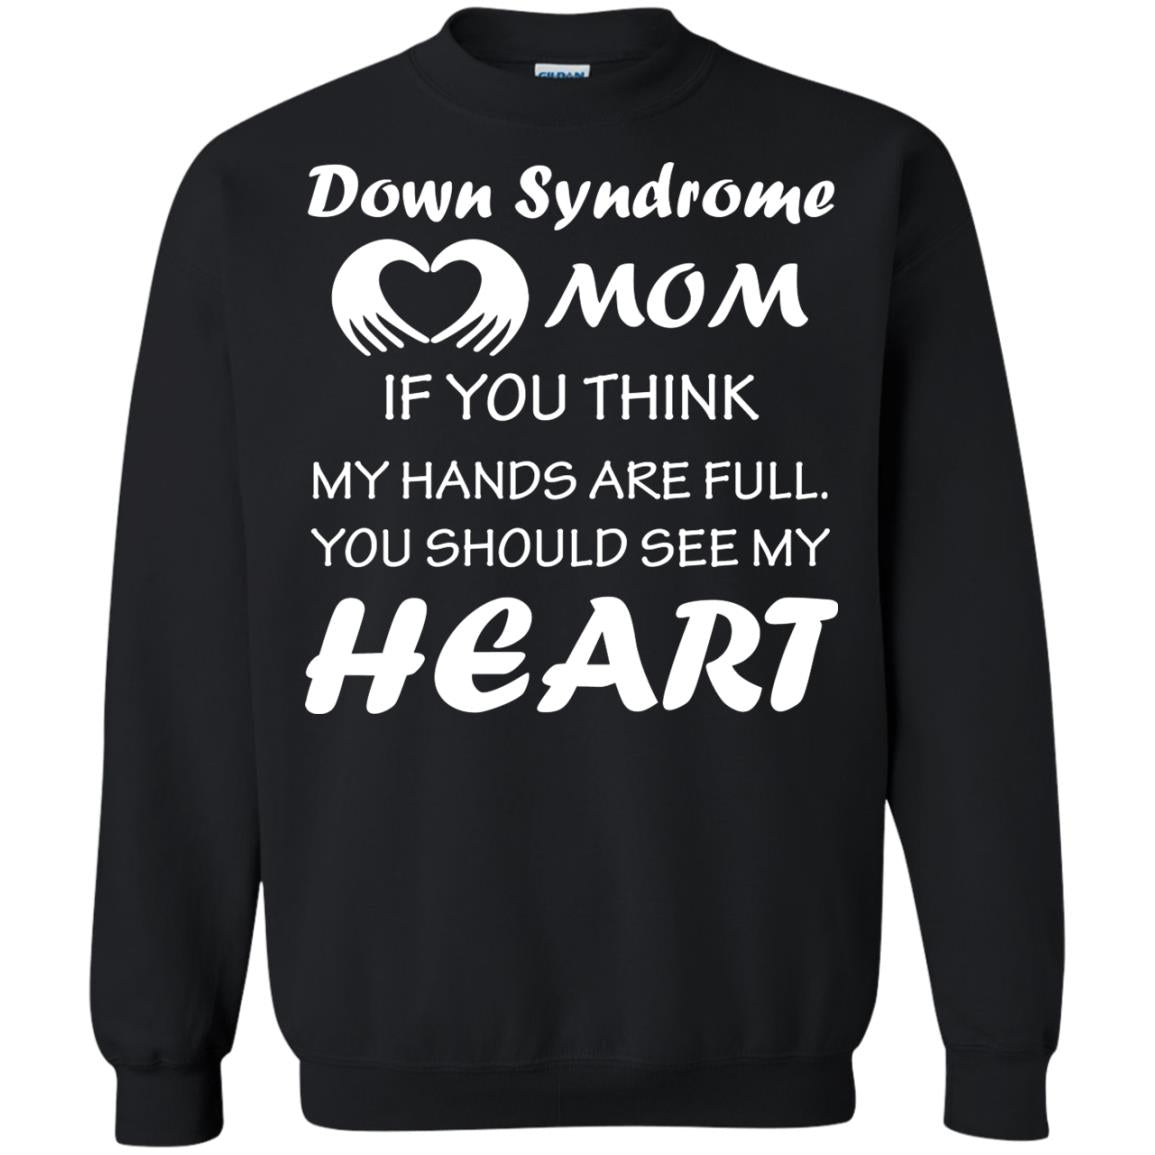 Down Syndrome Mom If You Think My Hands Are Full Down Syndrome Gift Shirt For Mom